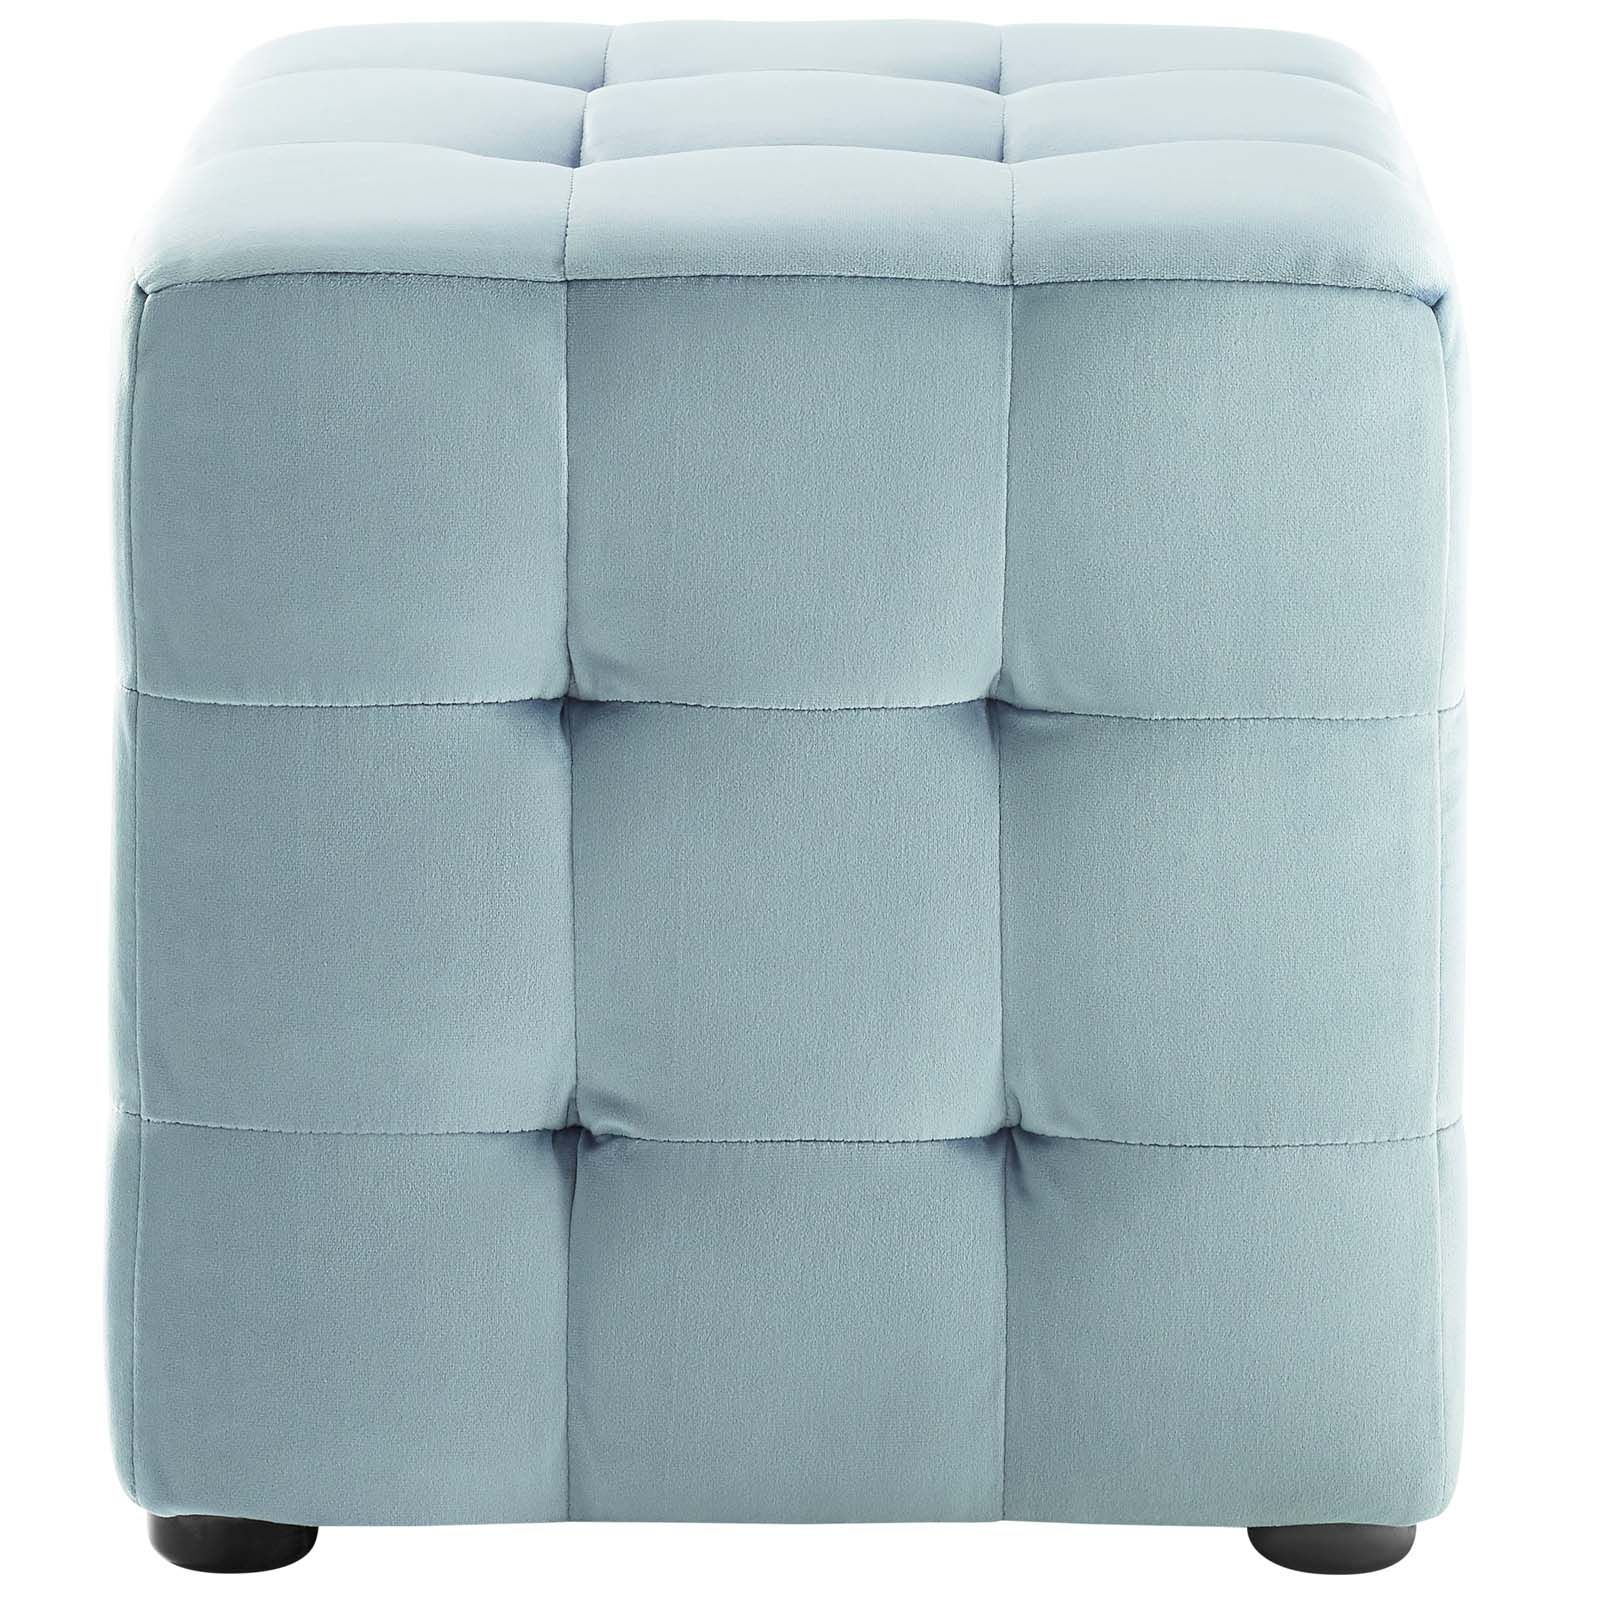 Contour Tufted Cube Performance Velvet Ottoman Light Blue For Blue Fabric Tufted Surfboard Ottomans (View 7 of 20)